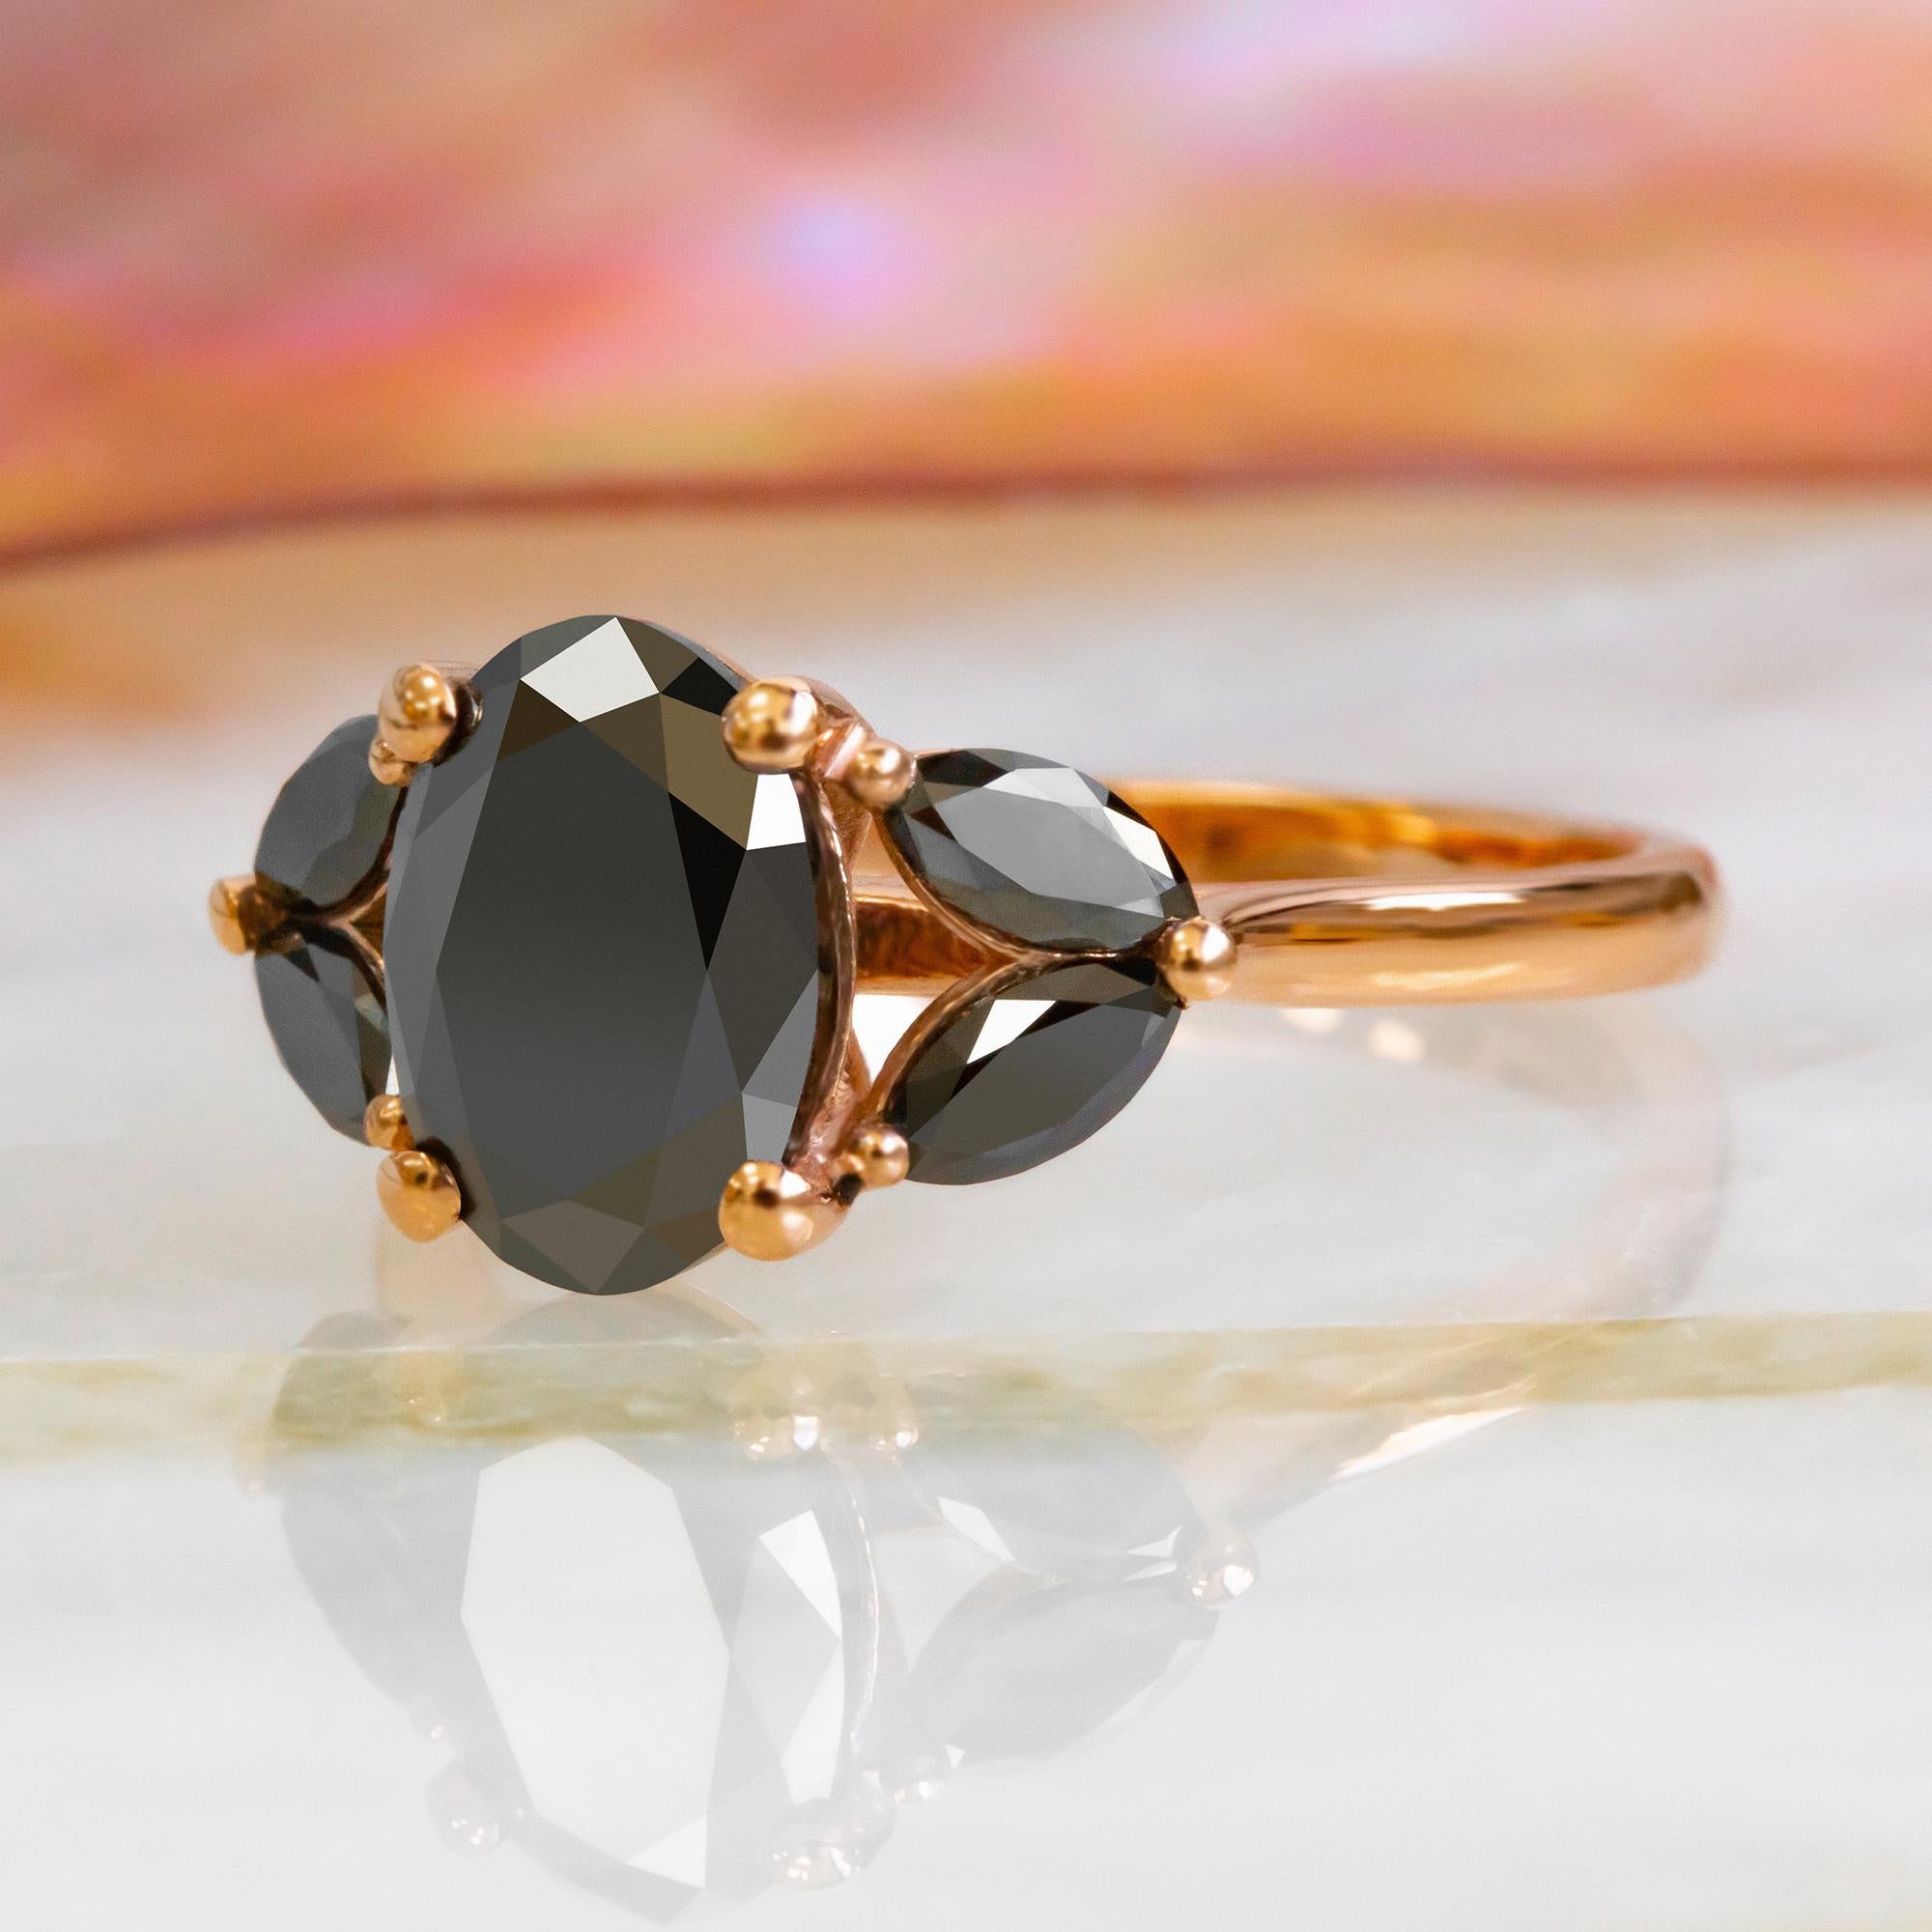 Unique black Diamond engagement ring set with Oval cut black diamond center stone in 14K Rose gold ring sided by opaque black Marquise diamonds creating a beautiful multi-shaped ring from DianaRafael's DianaBlackIce Natural Black Diamond Jewelry